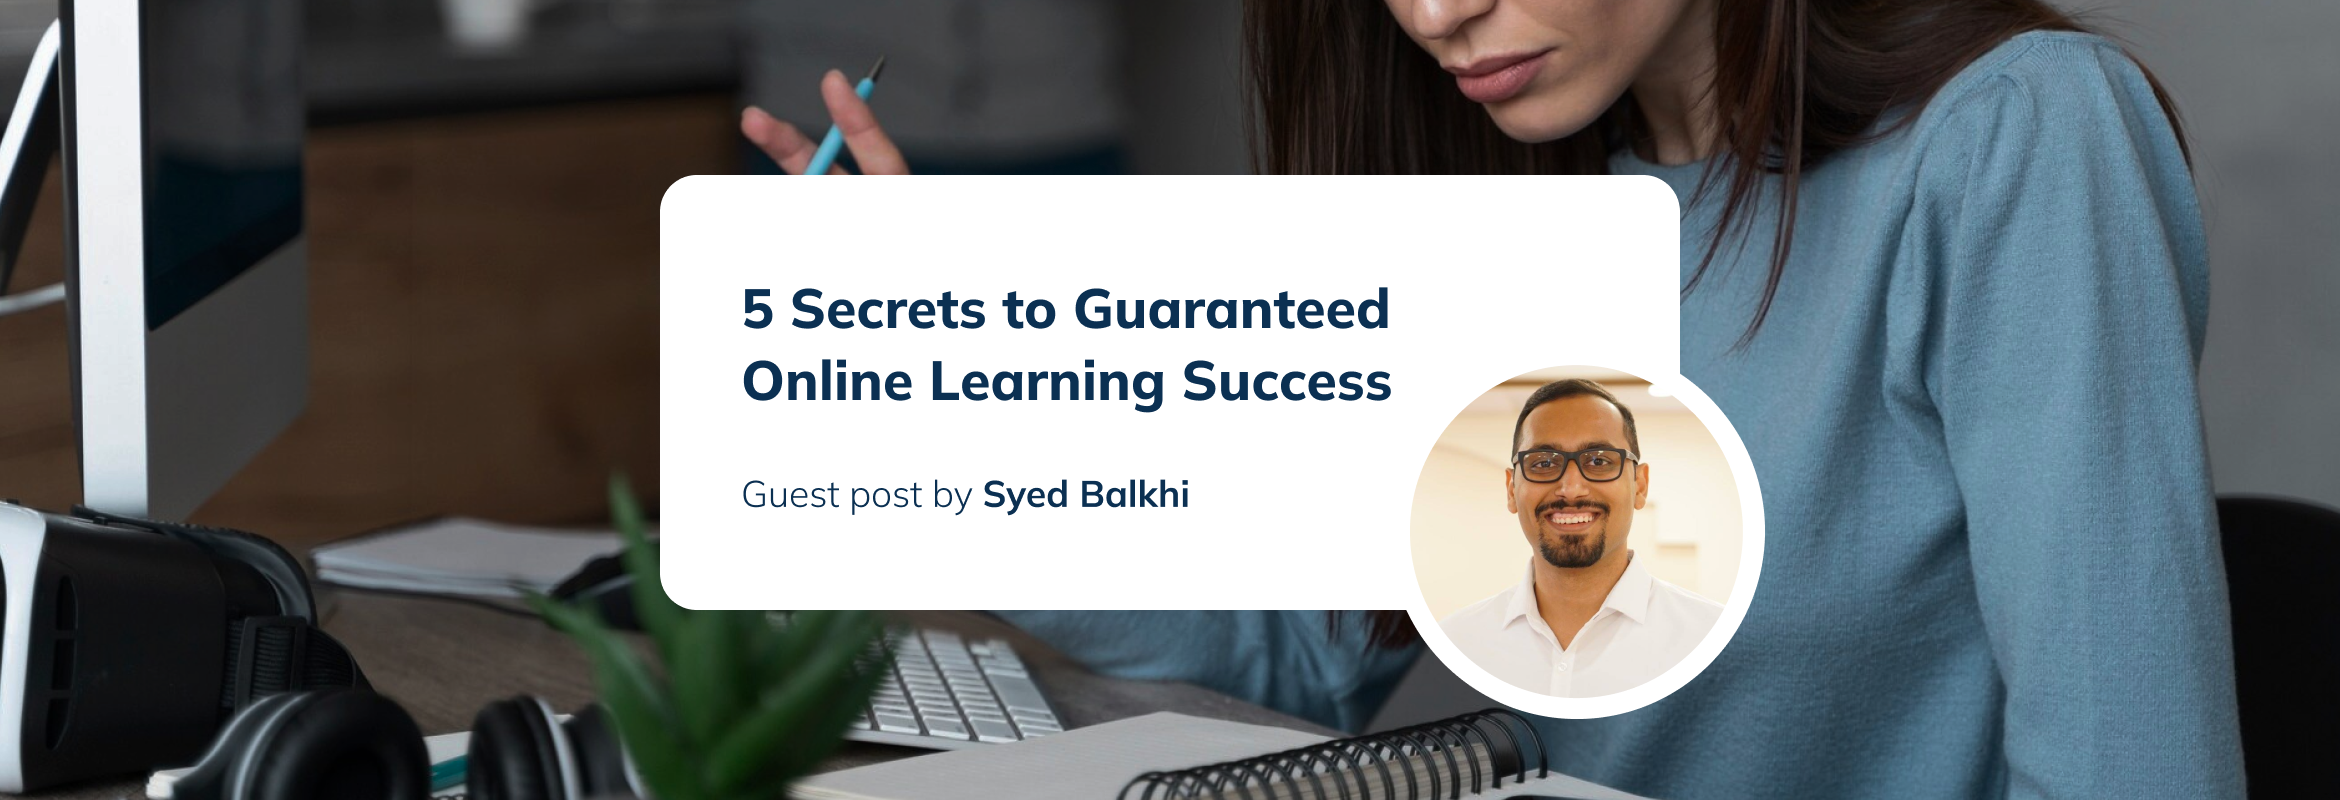 5 Secrets to Guaranteed Online Learning Success